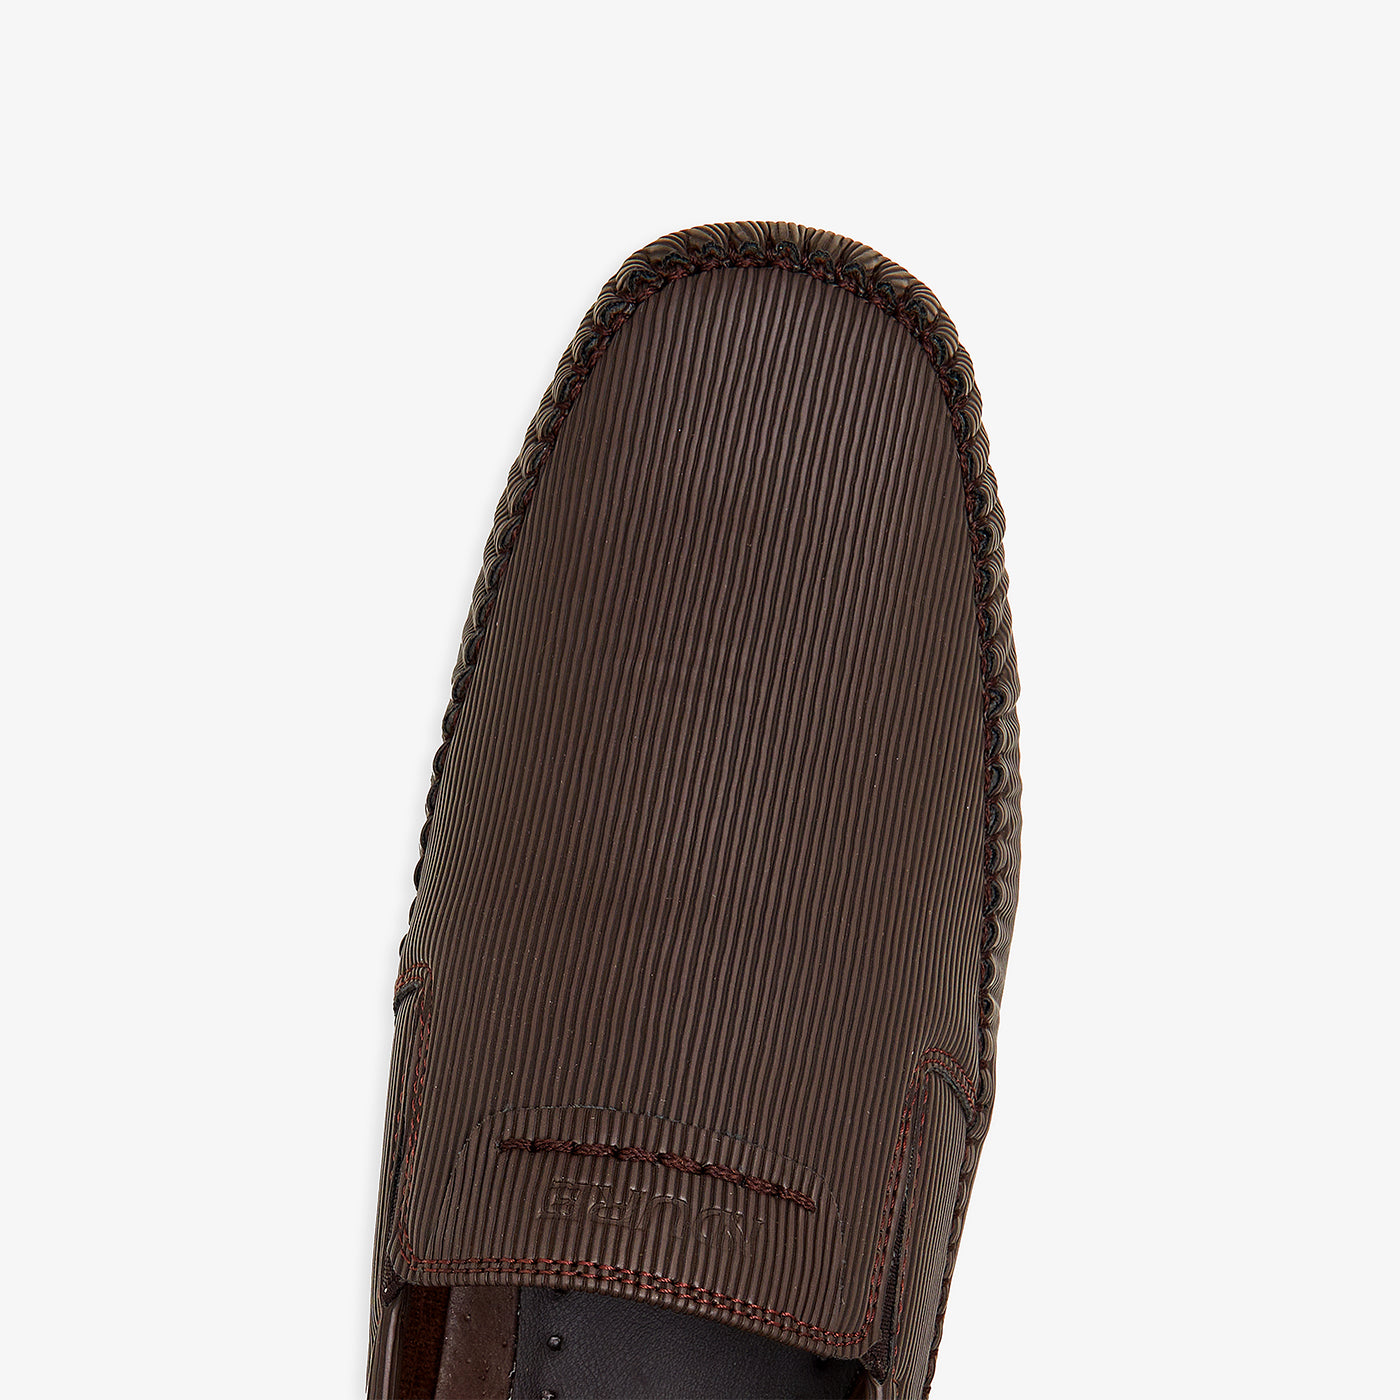 Men's Fashionable Loafers